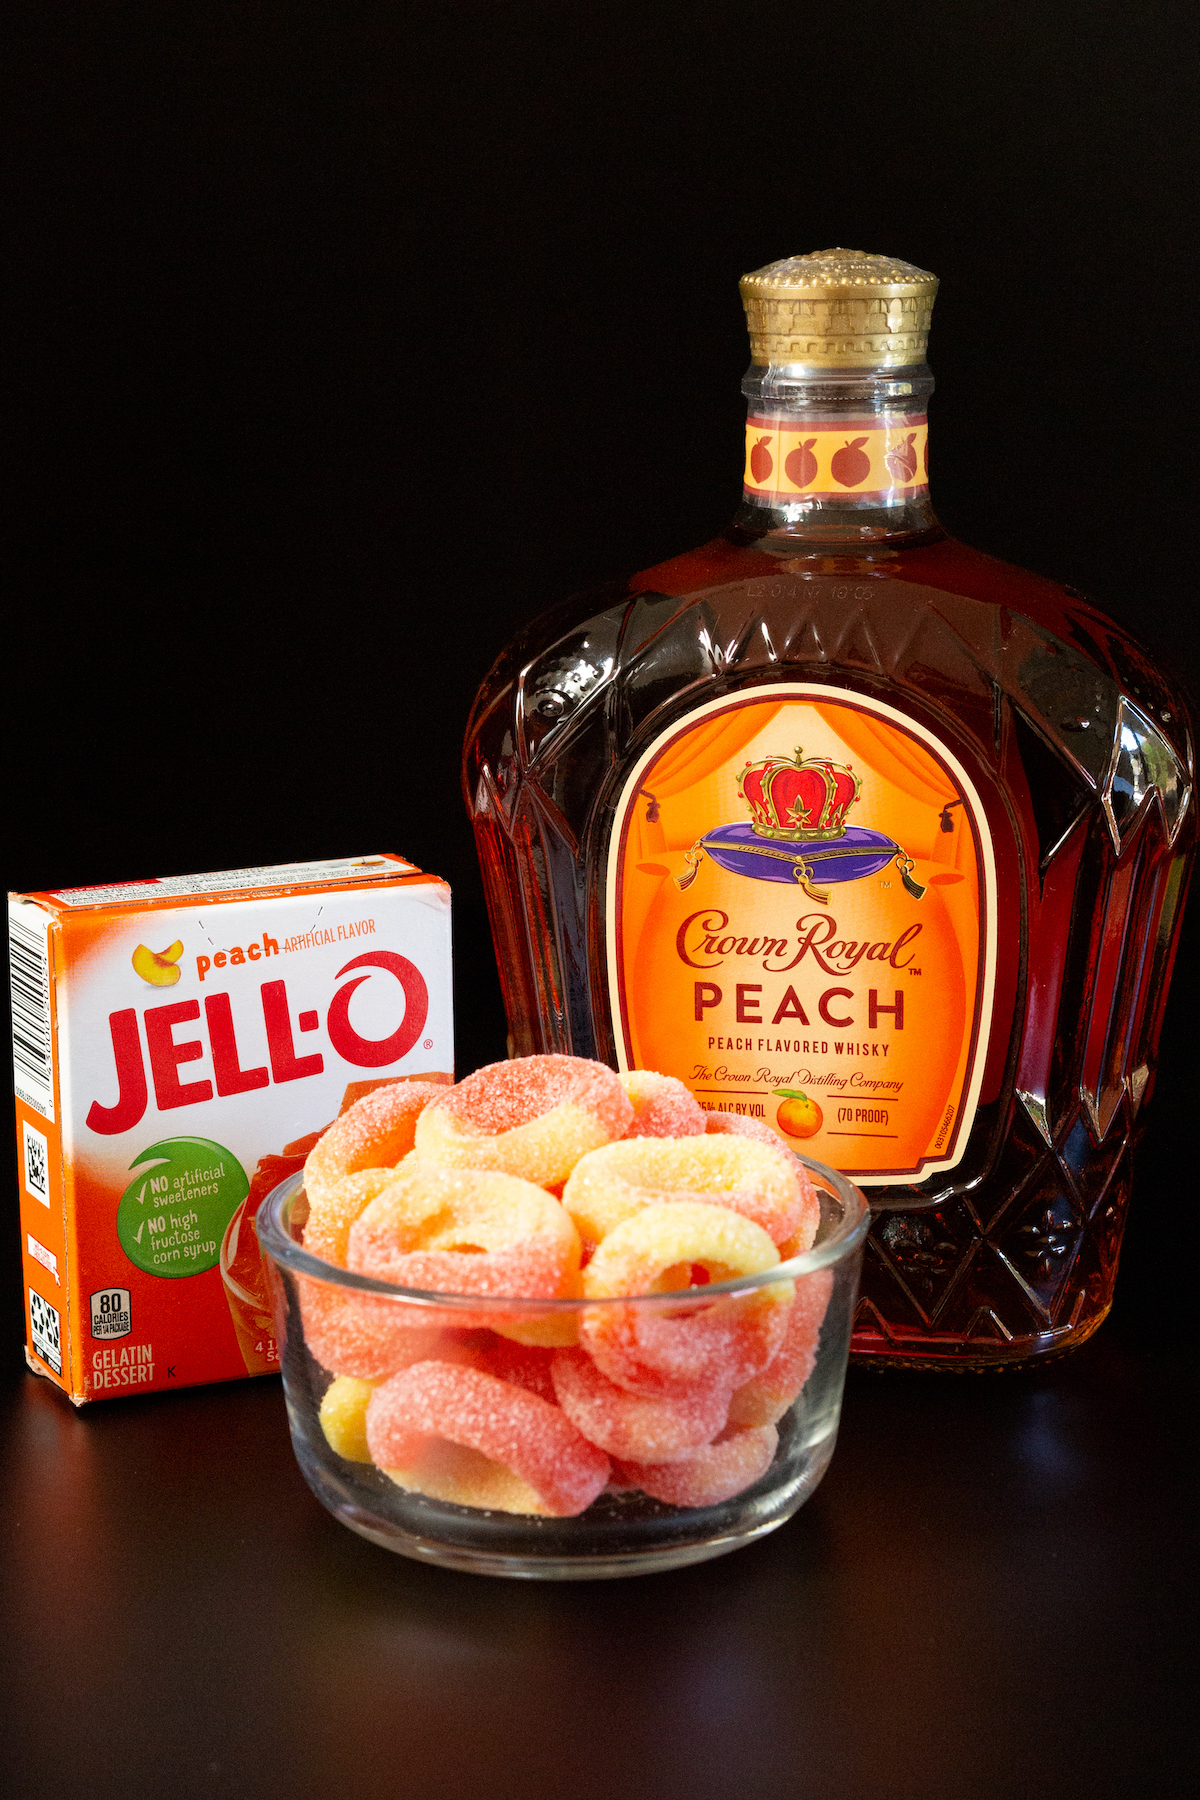 A box of peach gelatin, peach gummy rings, and a bottle of Crown Peach on a black background.